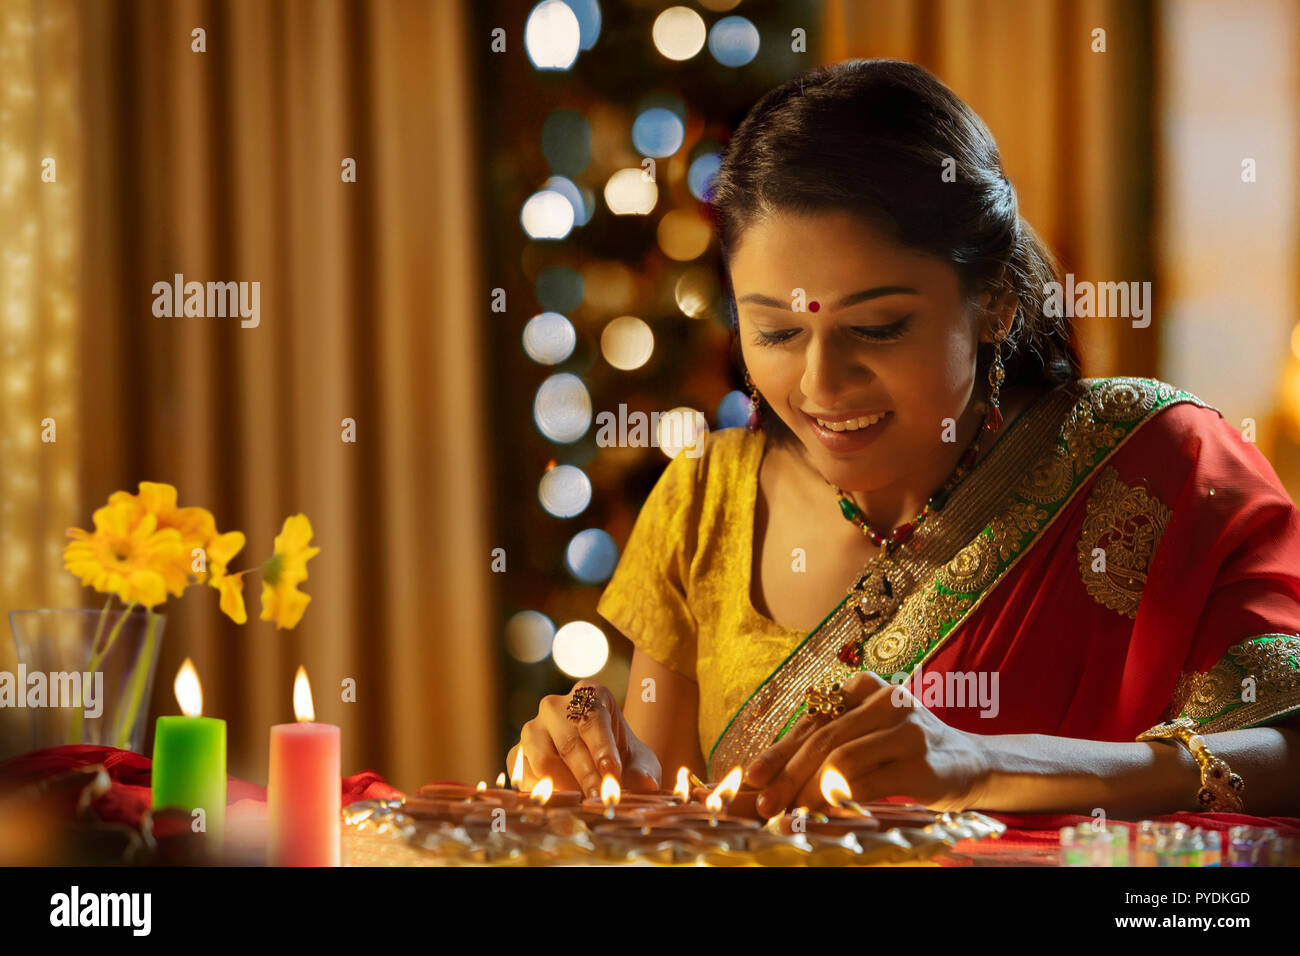 Woman decorating the house with diya on the occasion of diwali Stock Photo